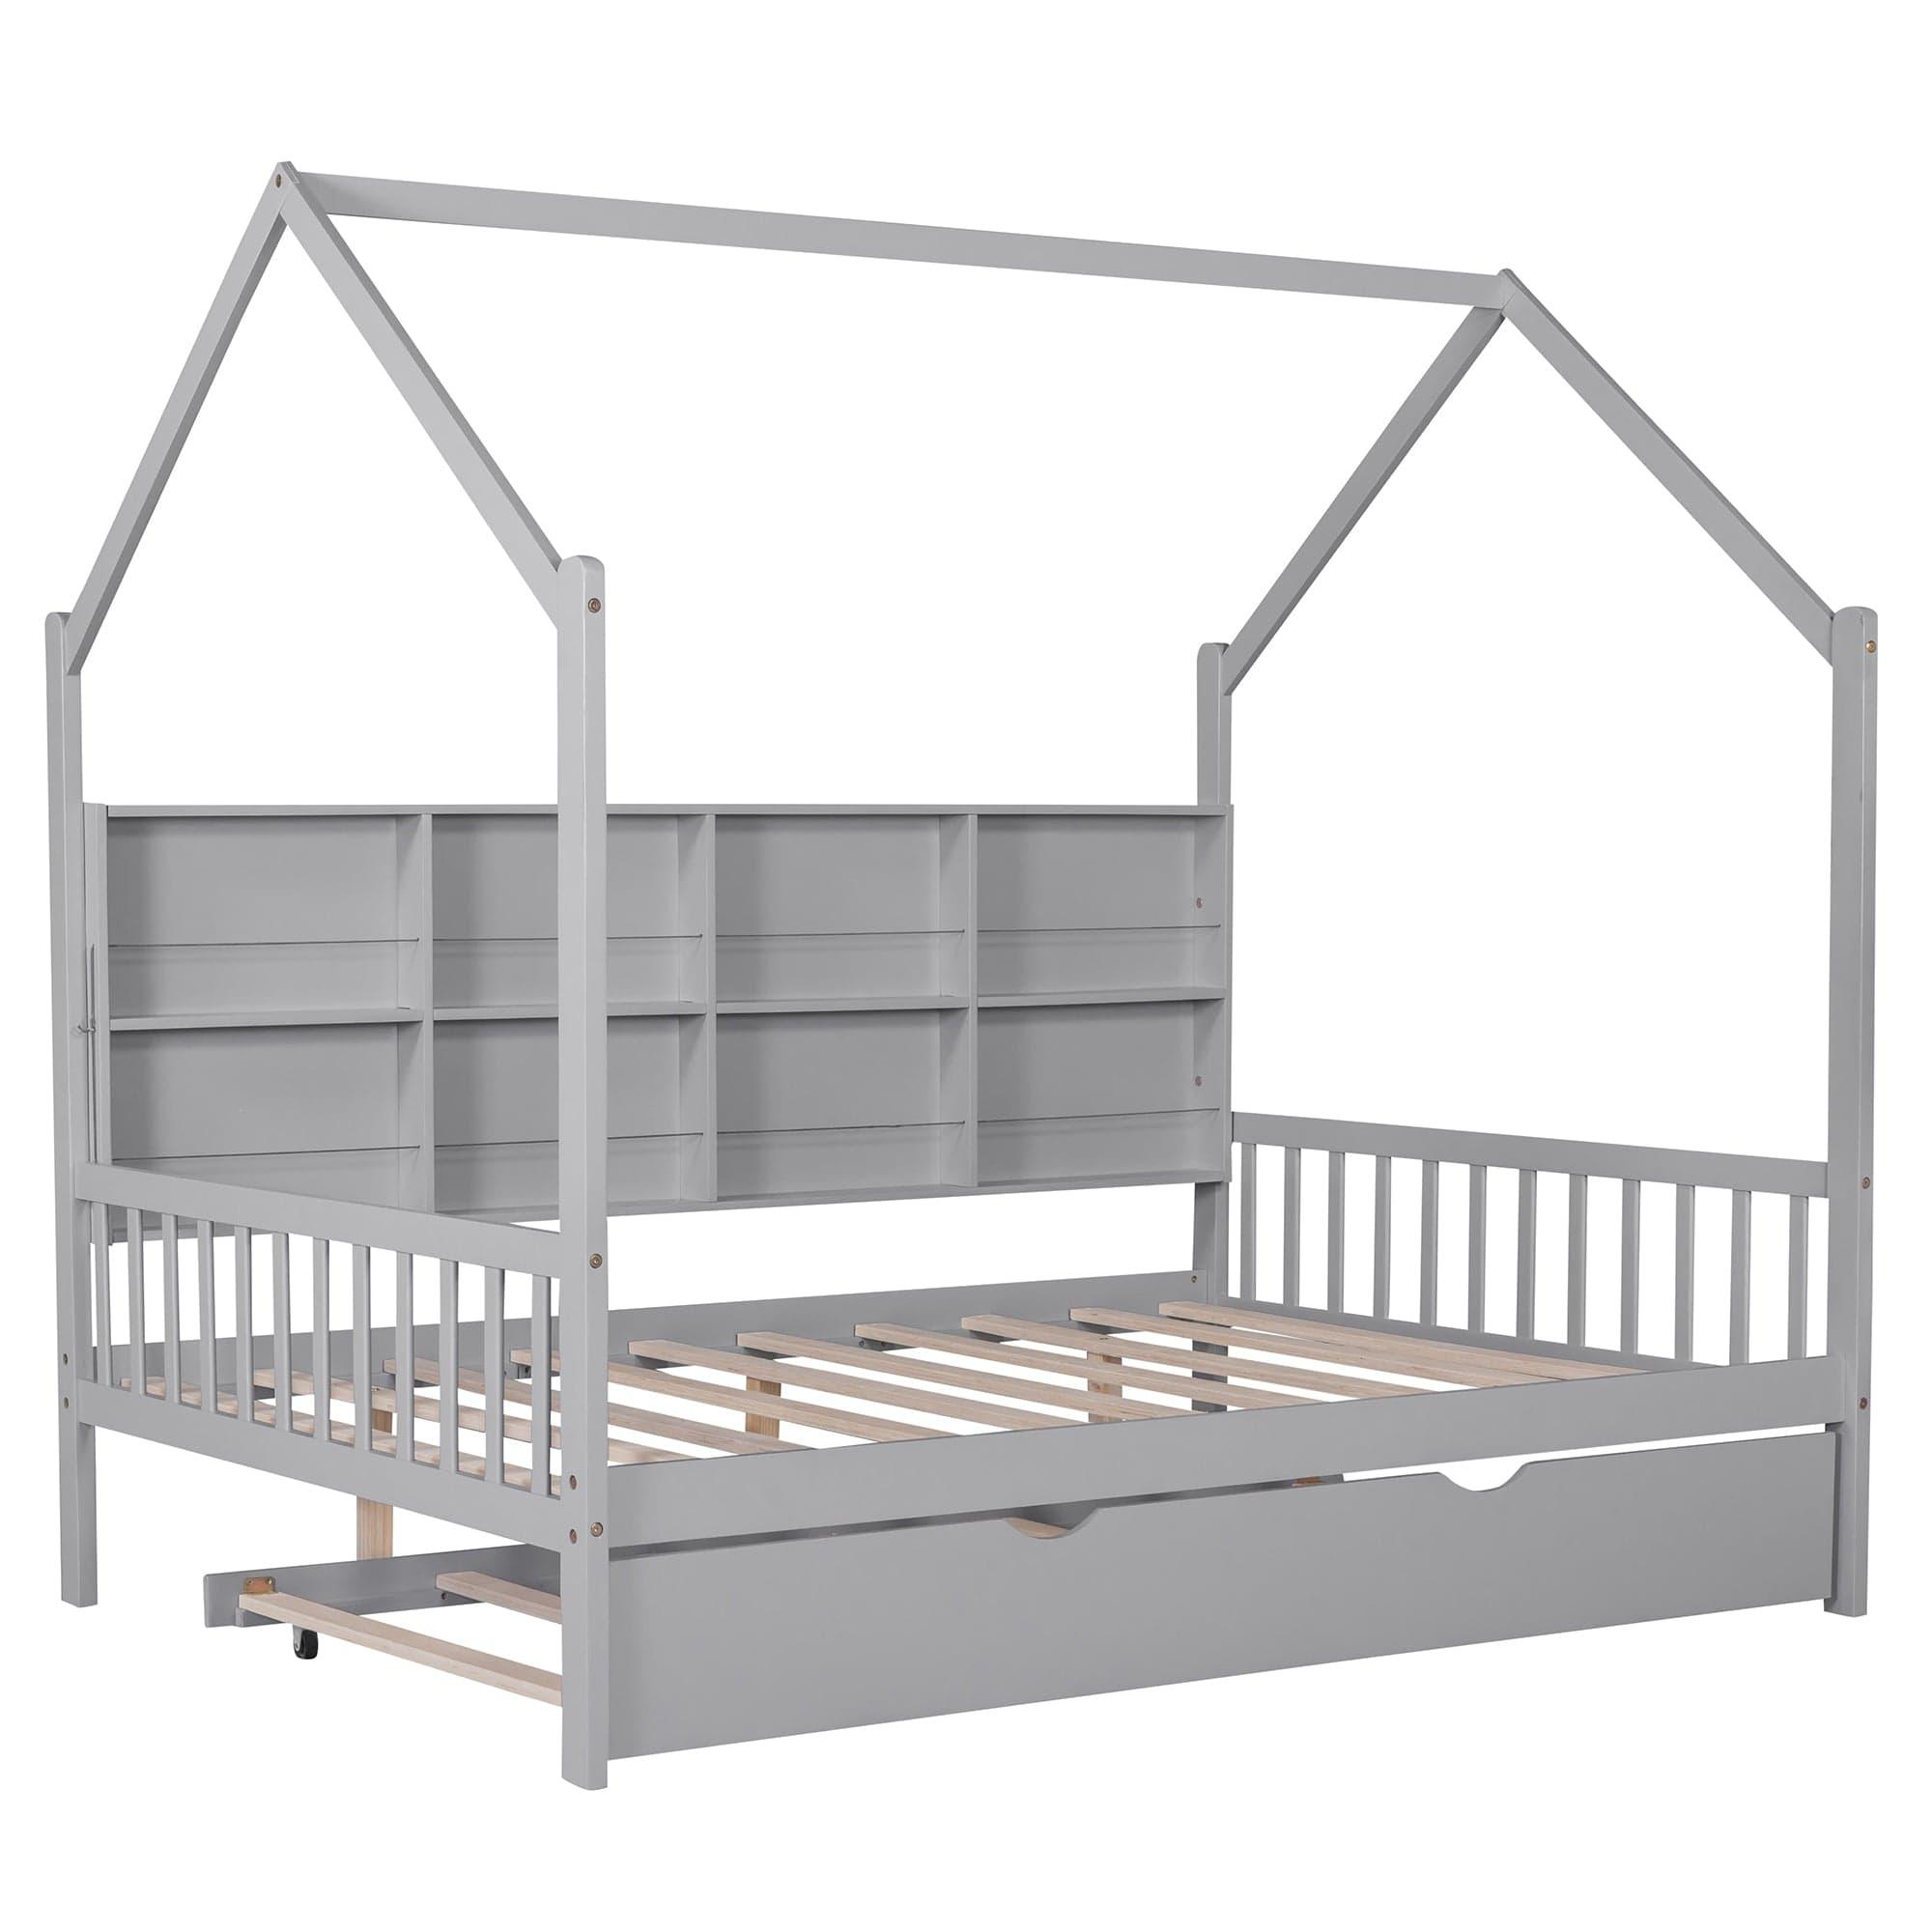 Shop Wooden Full Size House Bed with Trundle,Kids Bed with Shelf, Gray Mademoiselle Home Decor